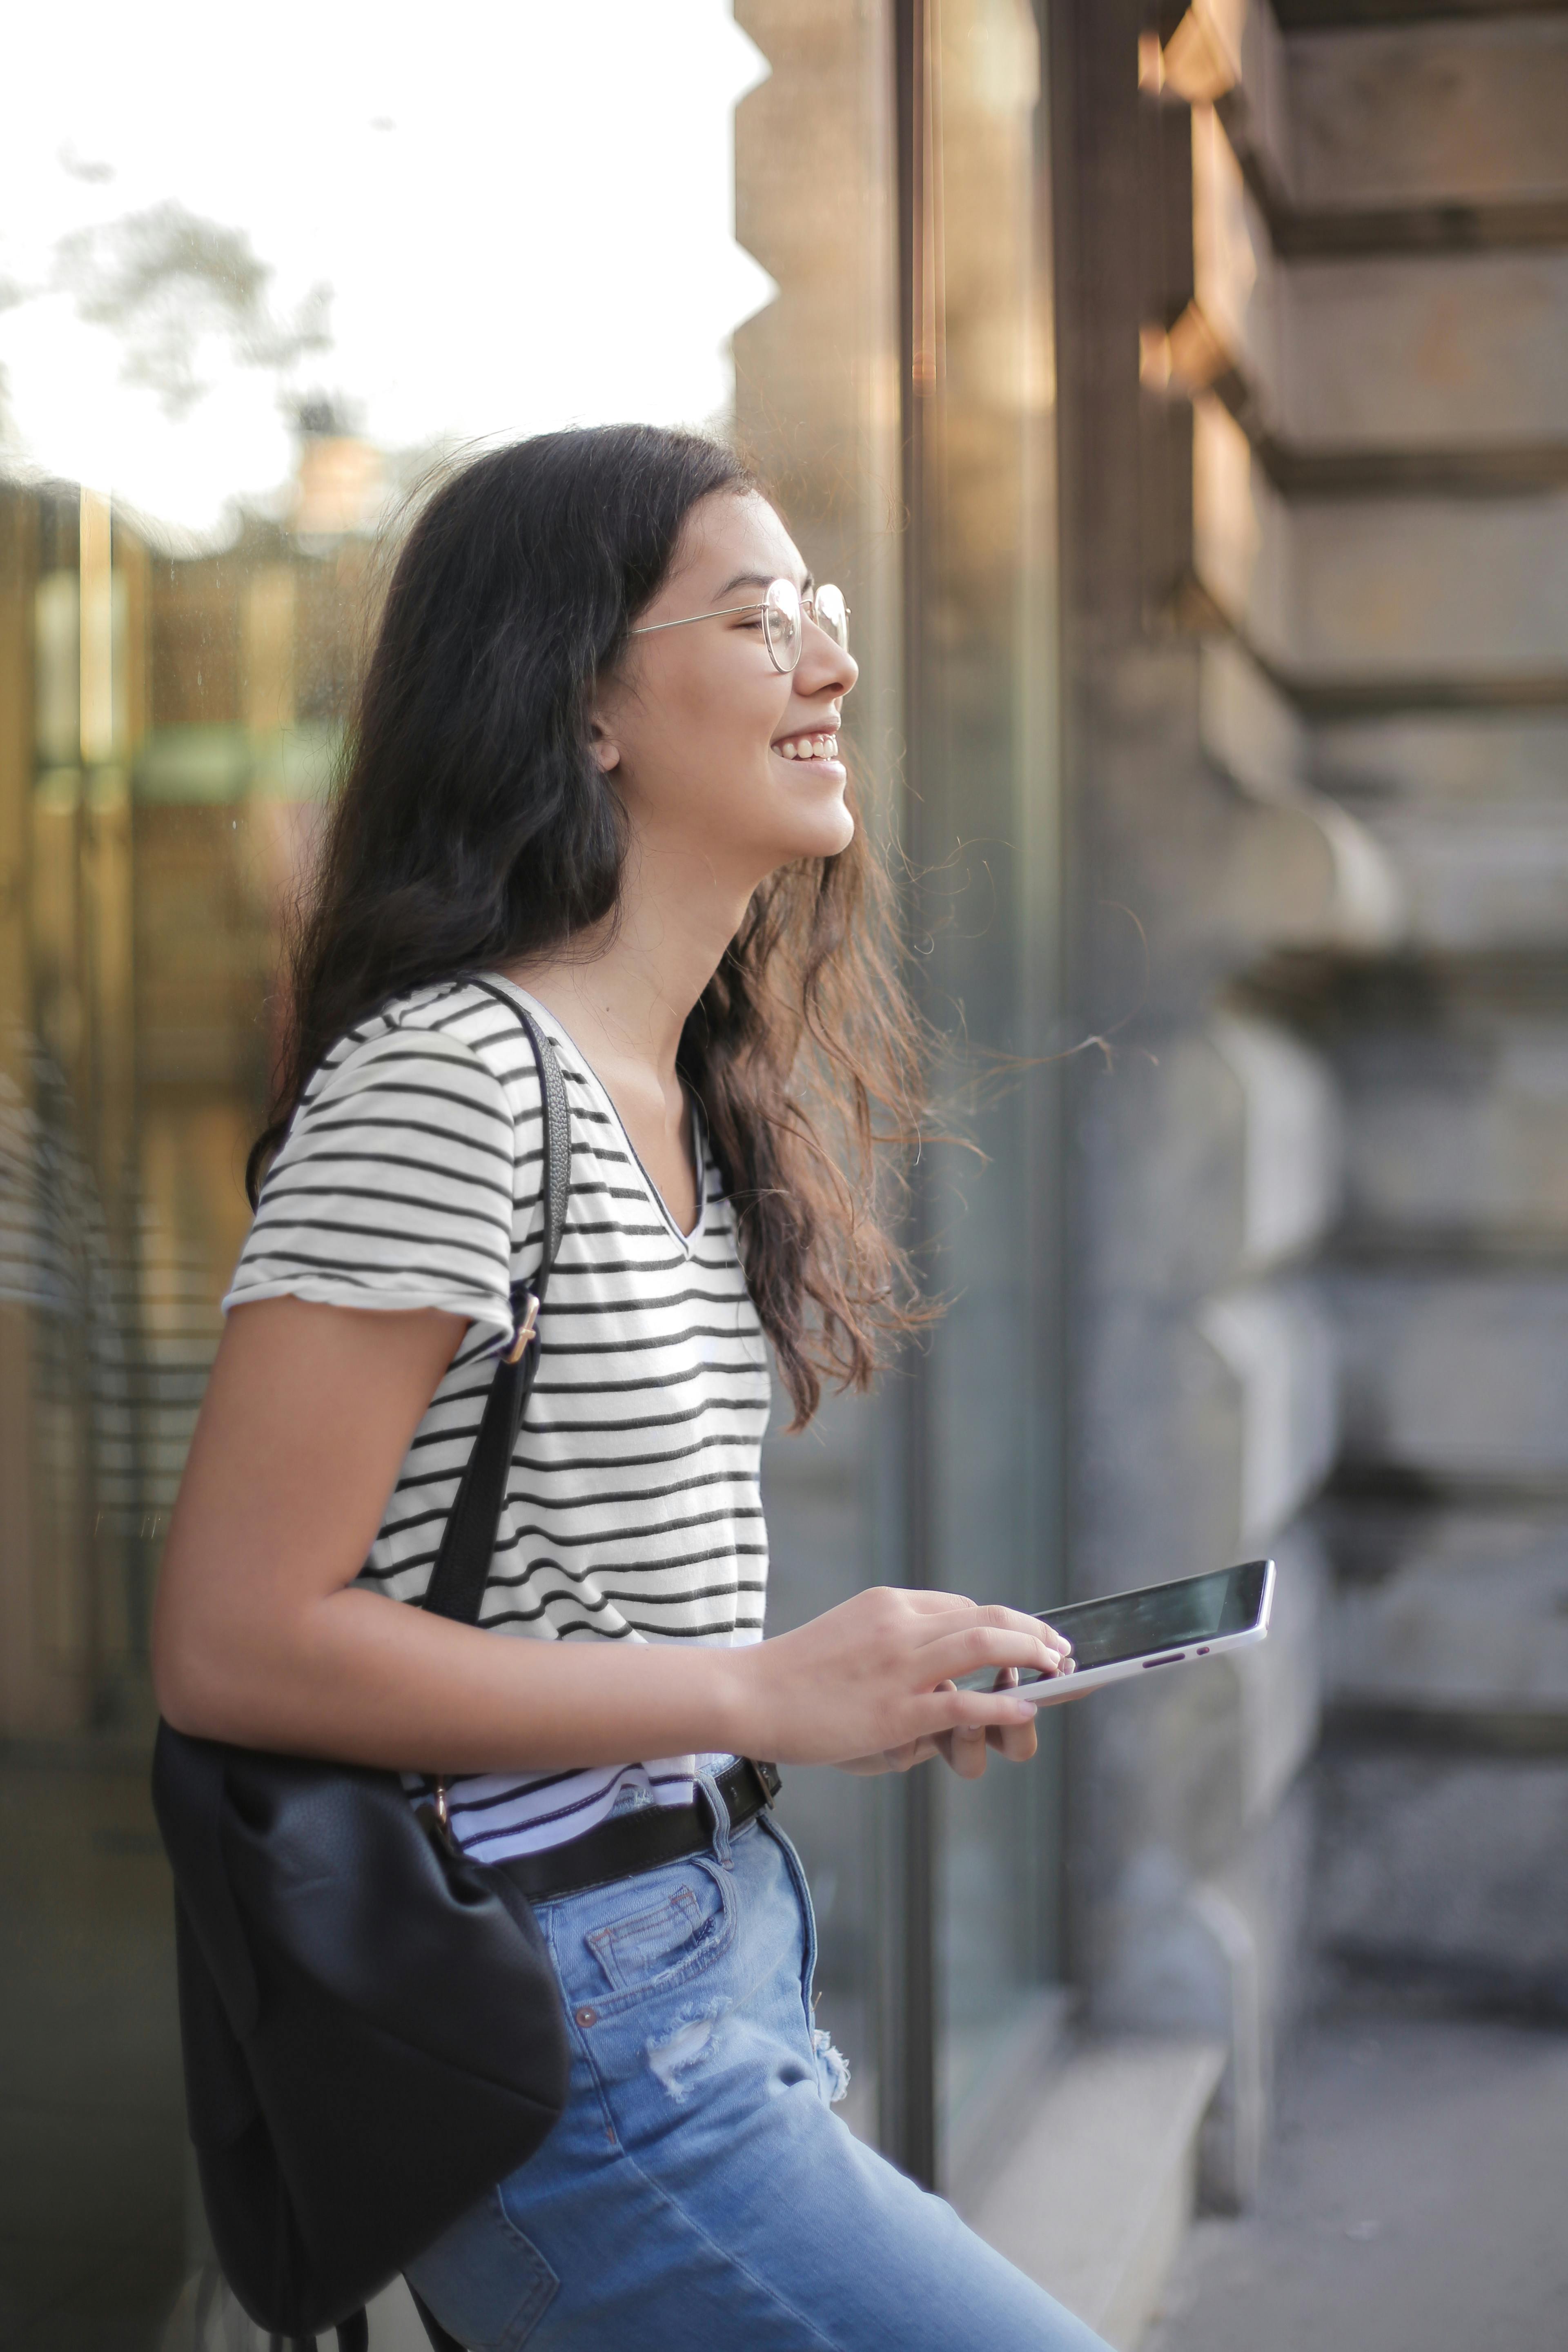 A woman smiling while holding her phone | Source: Pexels